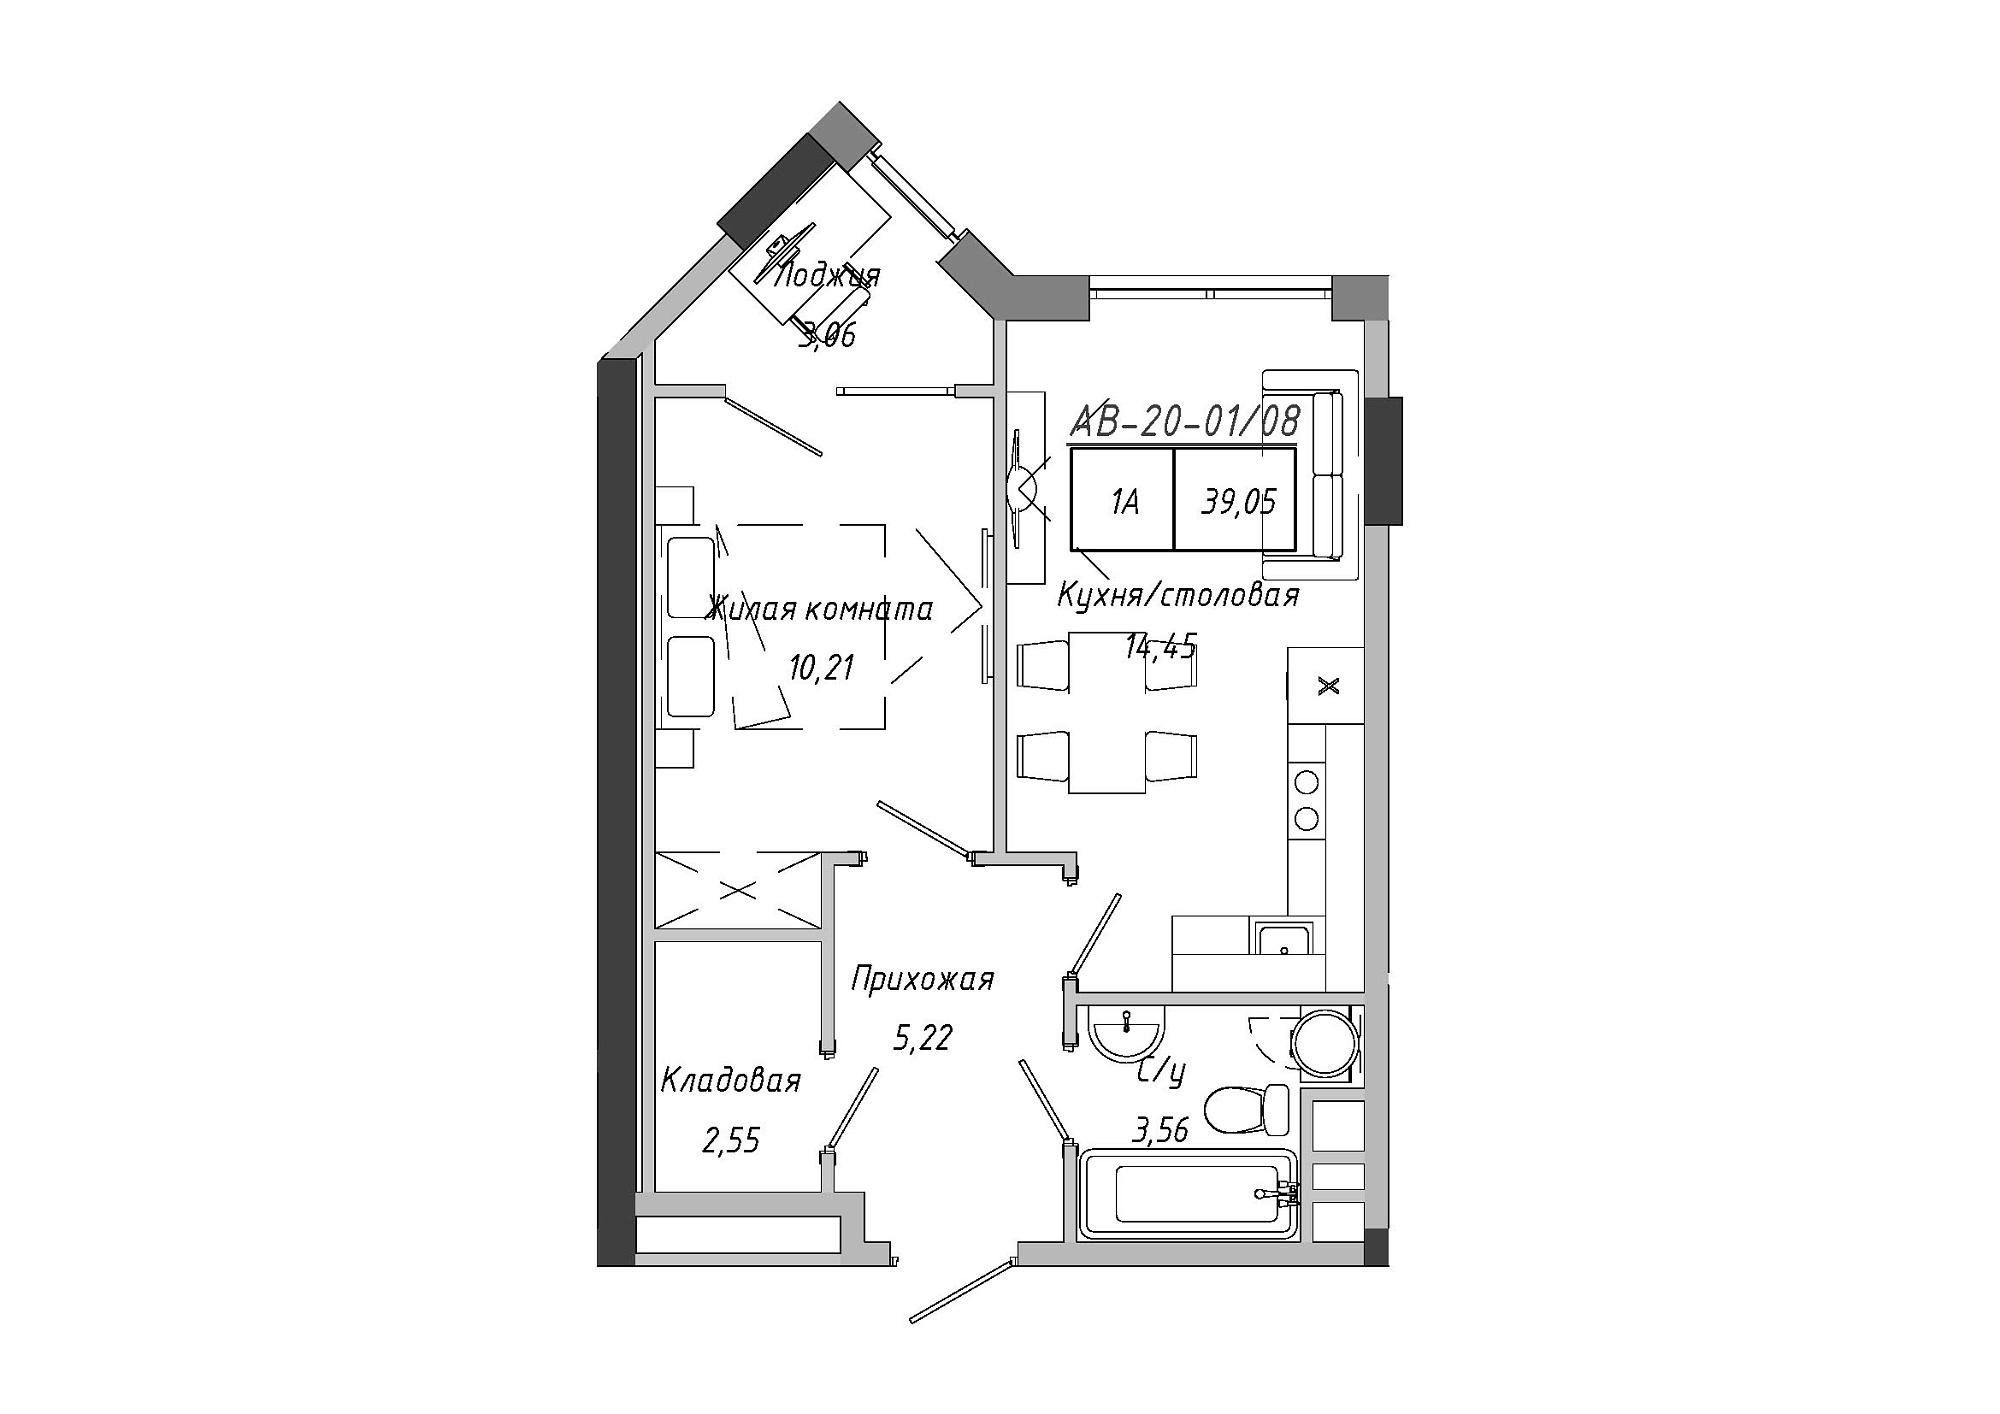 Planning 1-rm flats area 39.05m2, AB-20-01/00008.